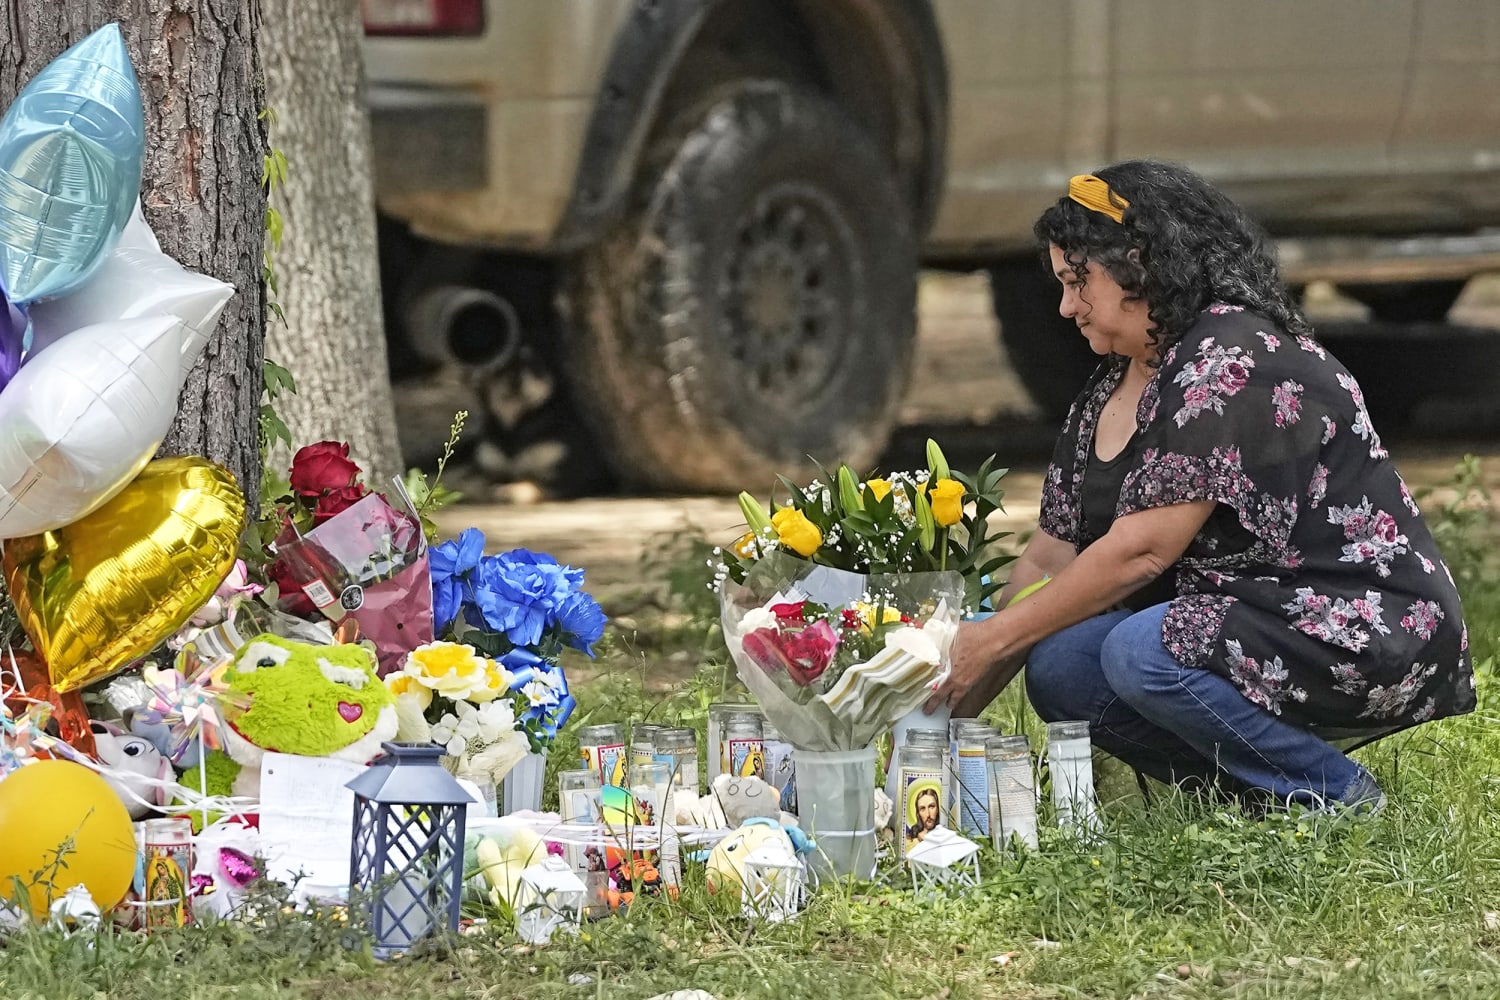 Texas shooting suspect Francisco Oropesa accused of killing 5 neighbors captured, official says